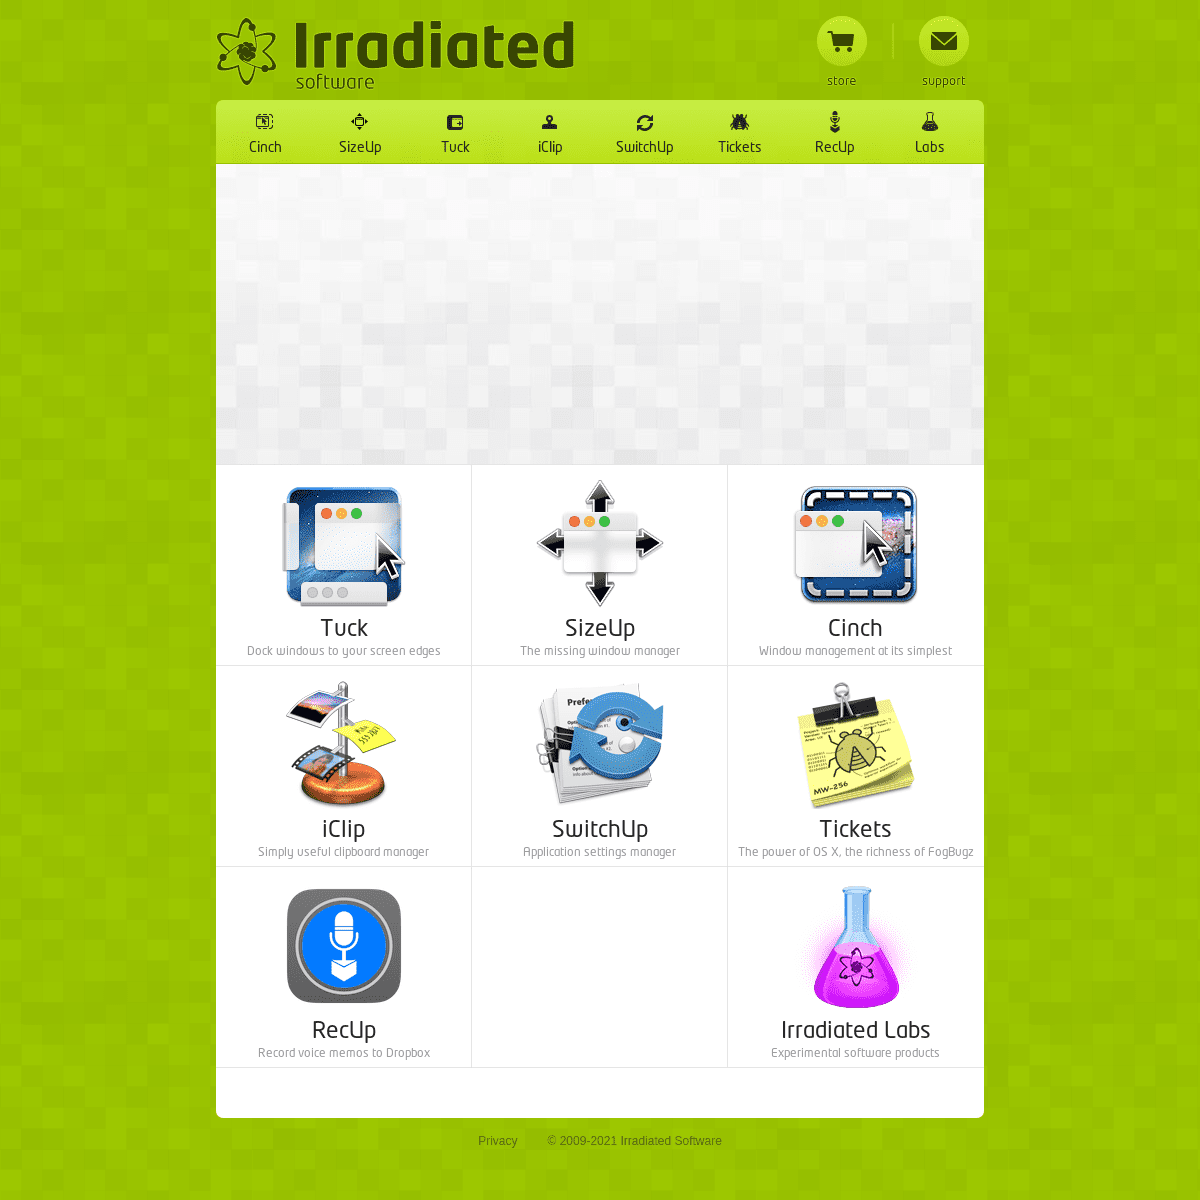 A complete backup of https://irradiatedsoftware.com